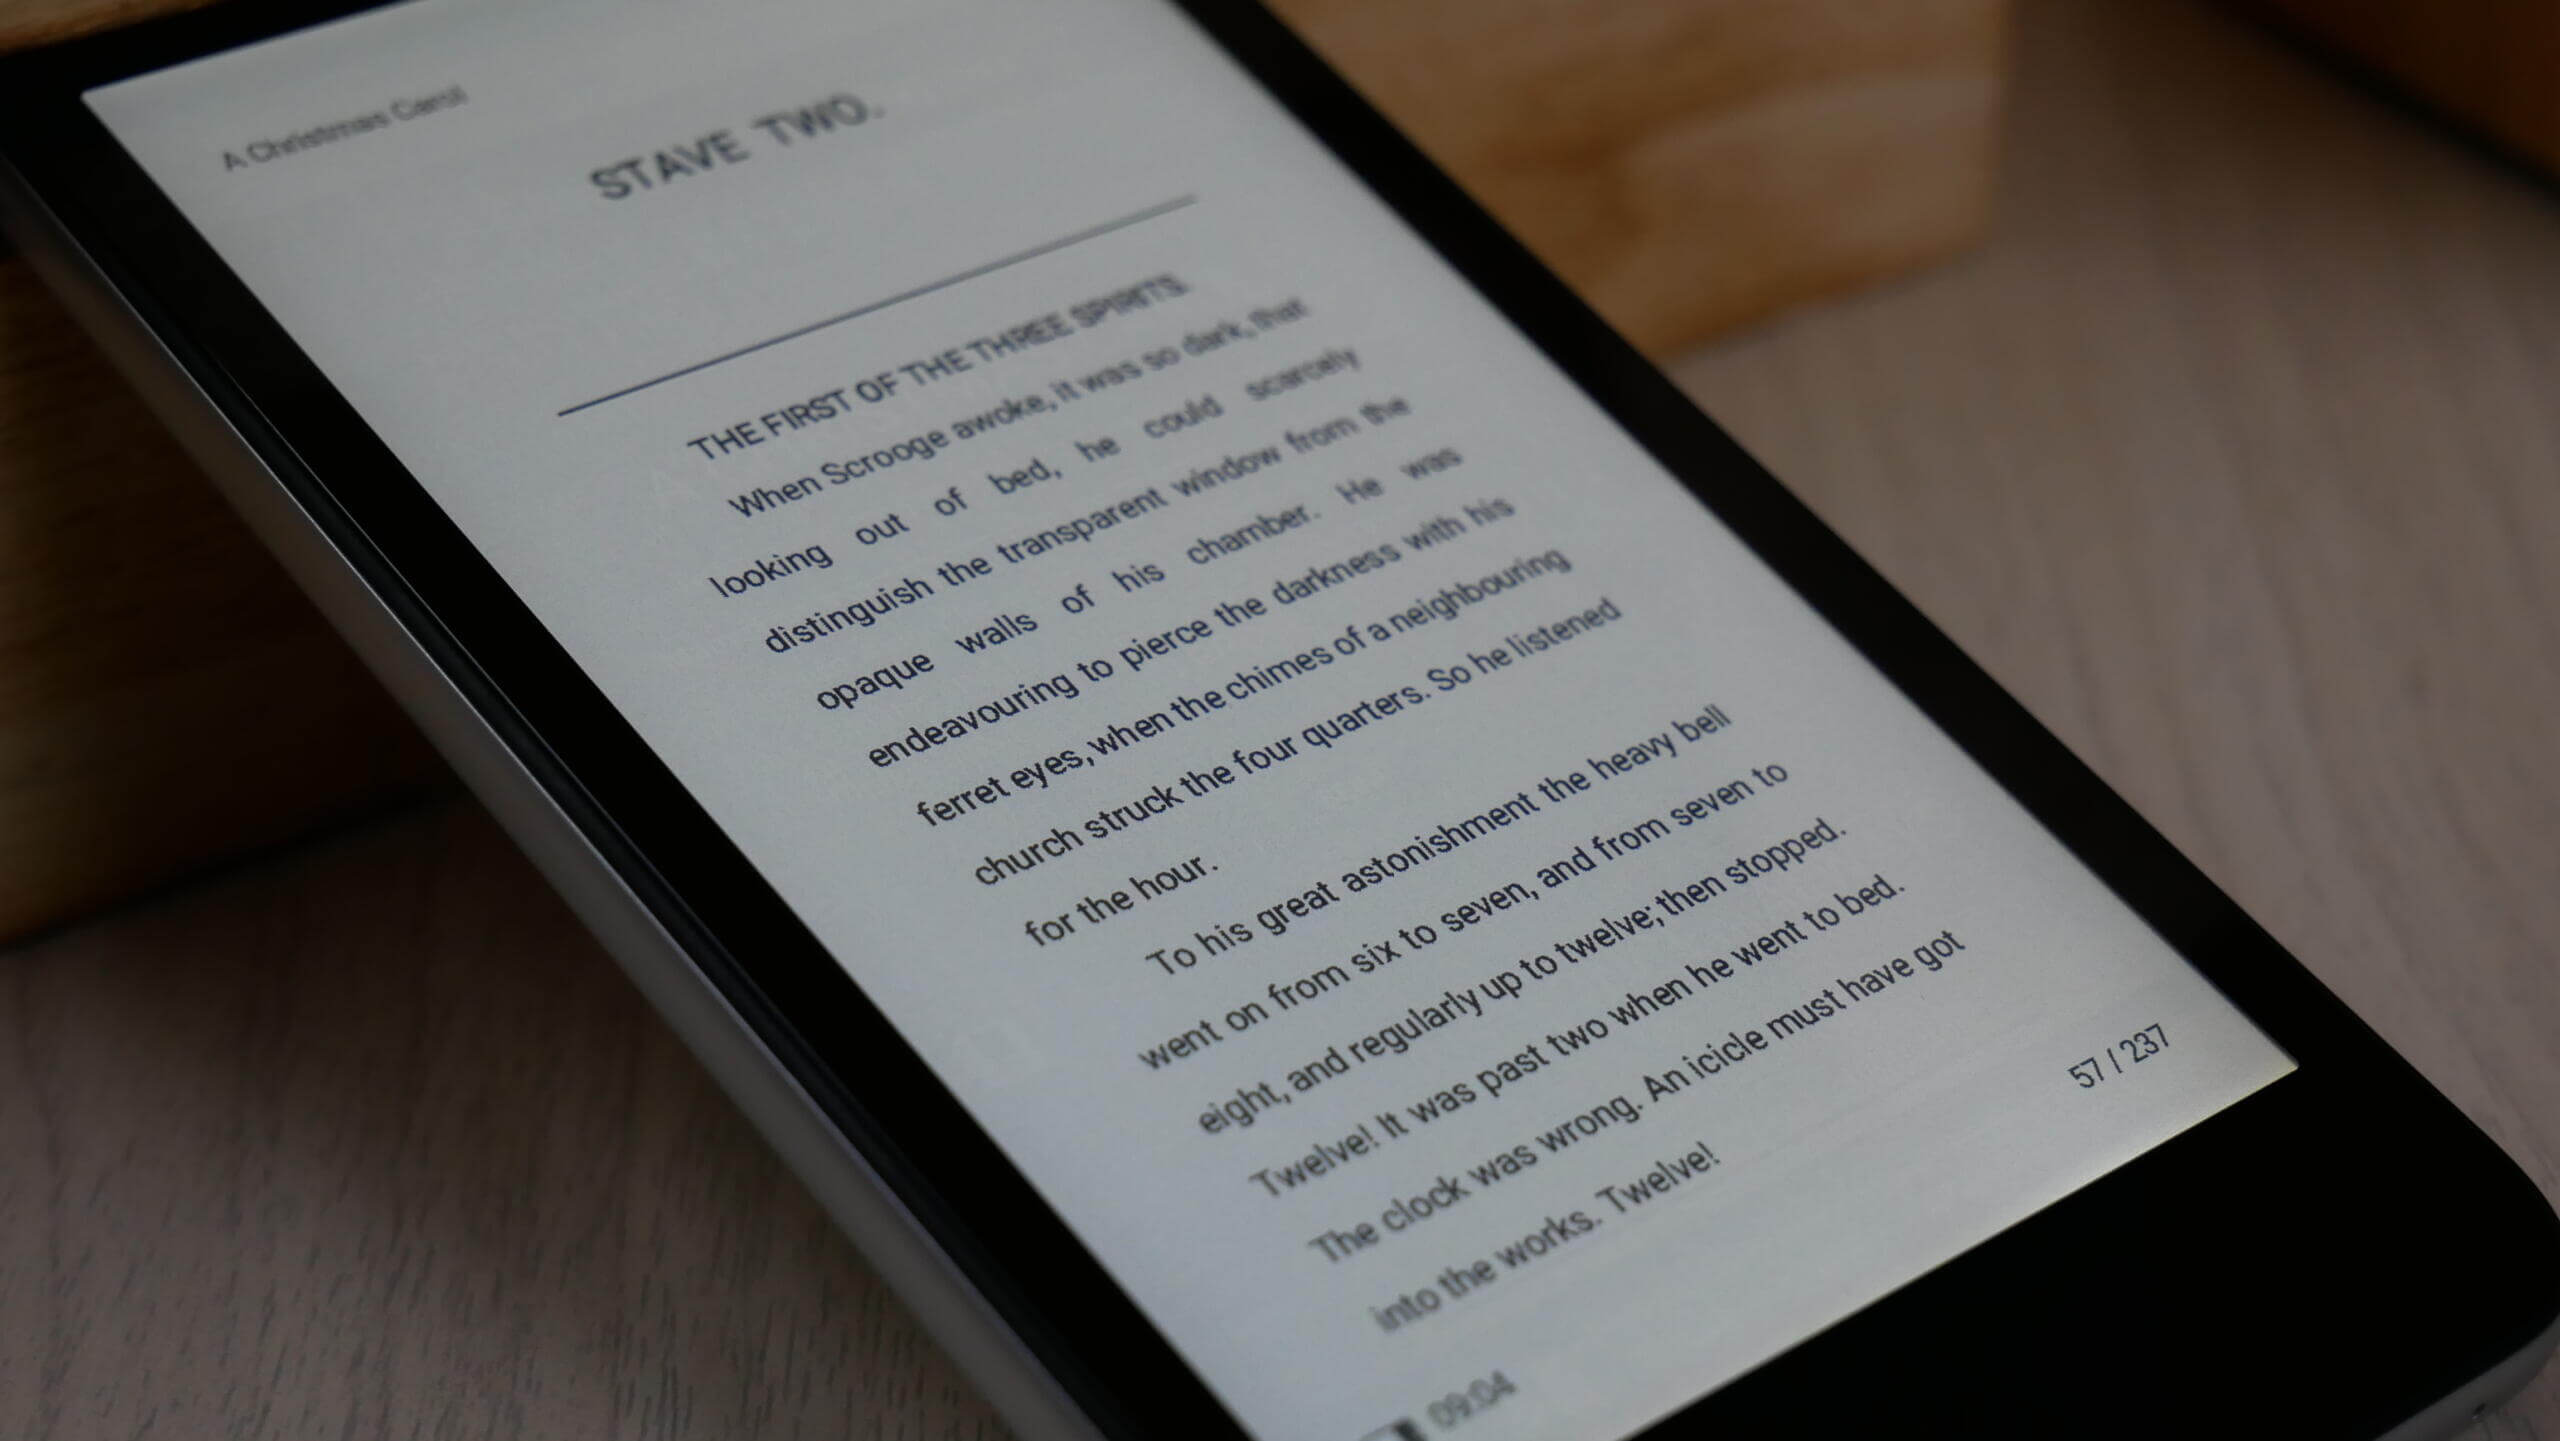 Xiaomi InkPalm 5.2 eReader is available worldwide for around $110 and up -  Liliputing